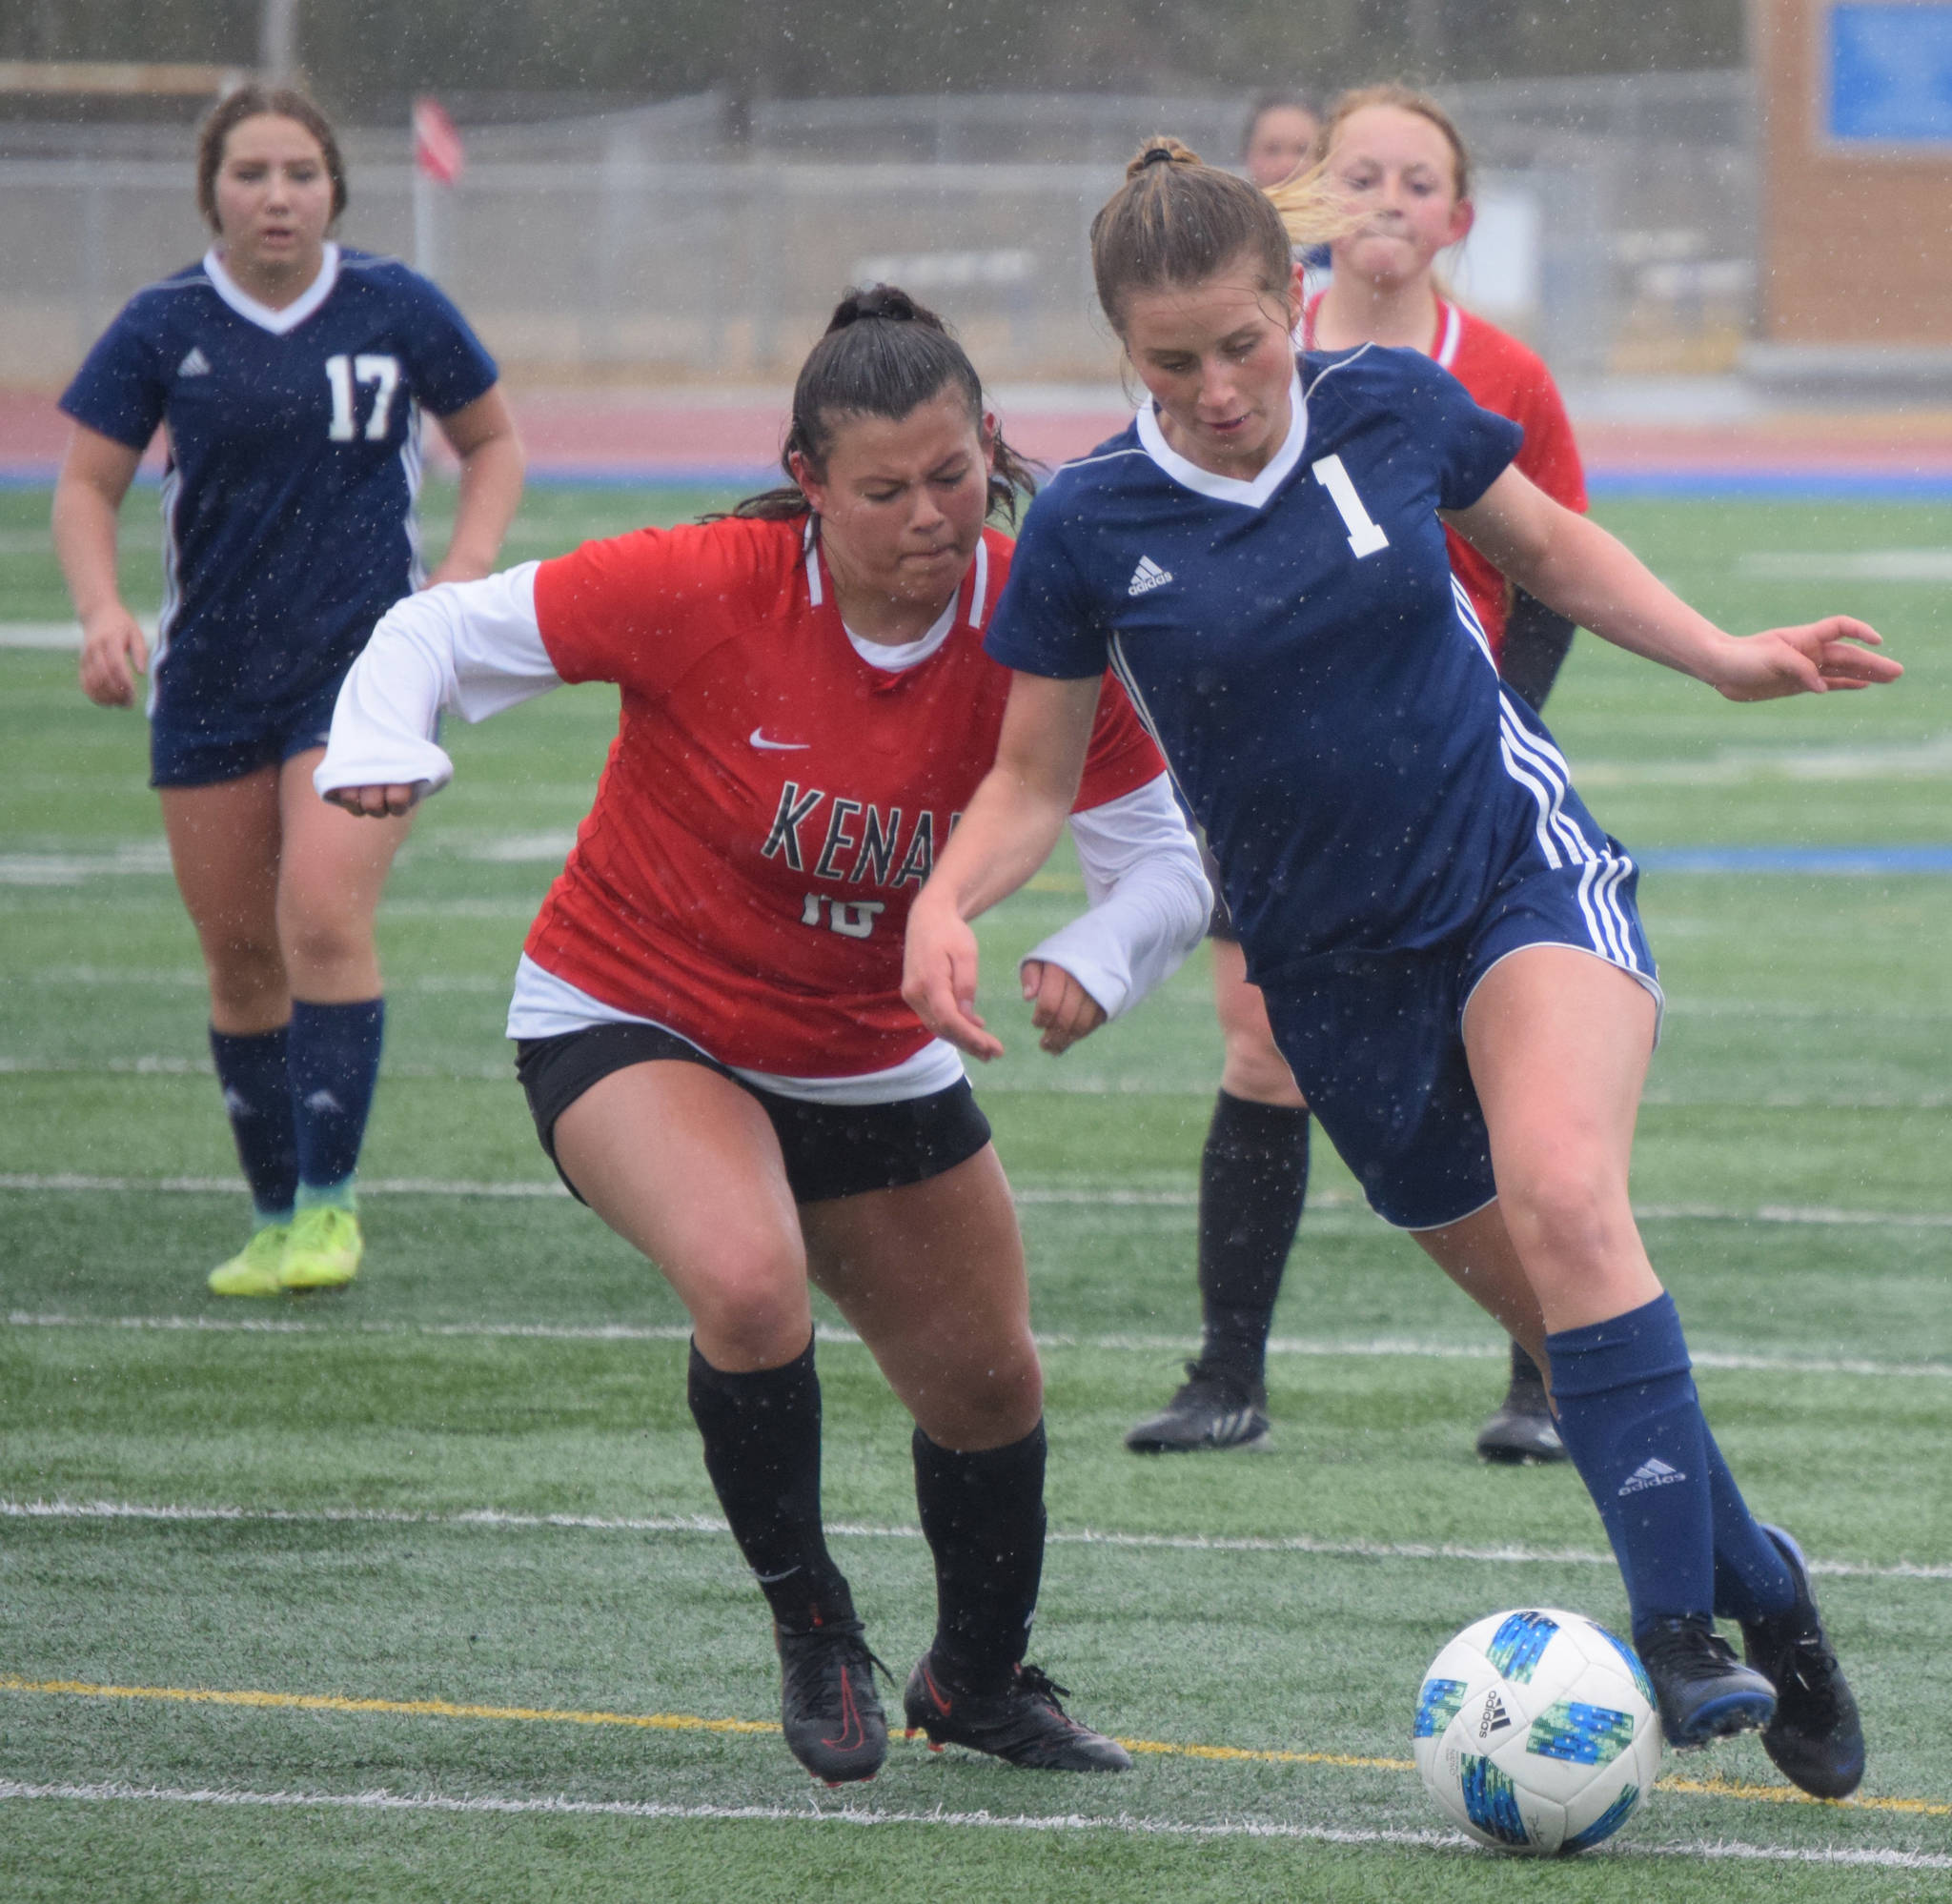 Soldotna’s Rhys Cannava dribbles in for a goal against Kenai Central’s Valerie Villegas on Tuesday, May 11, 2021, at Soldotna High School in Soldotna, Alaska. (Photo by Jeff Helminiak/Peninsula Clarion)